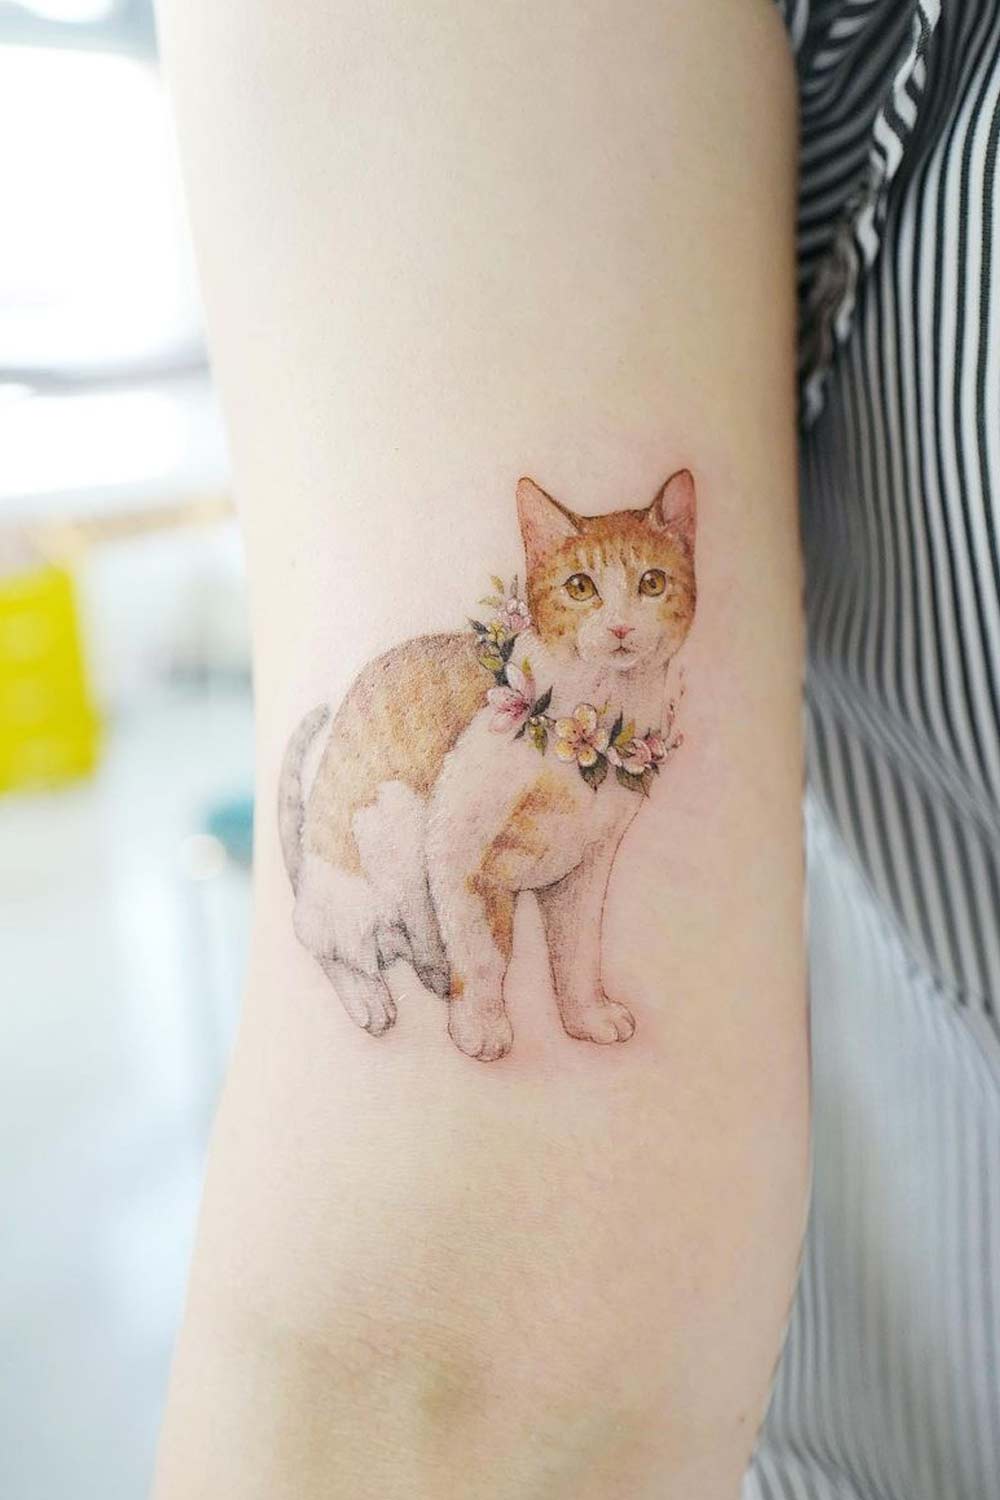 Cute Cat Tattoo with Floral Wreath